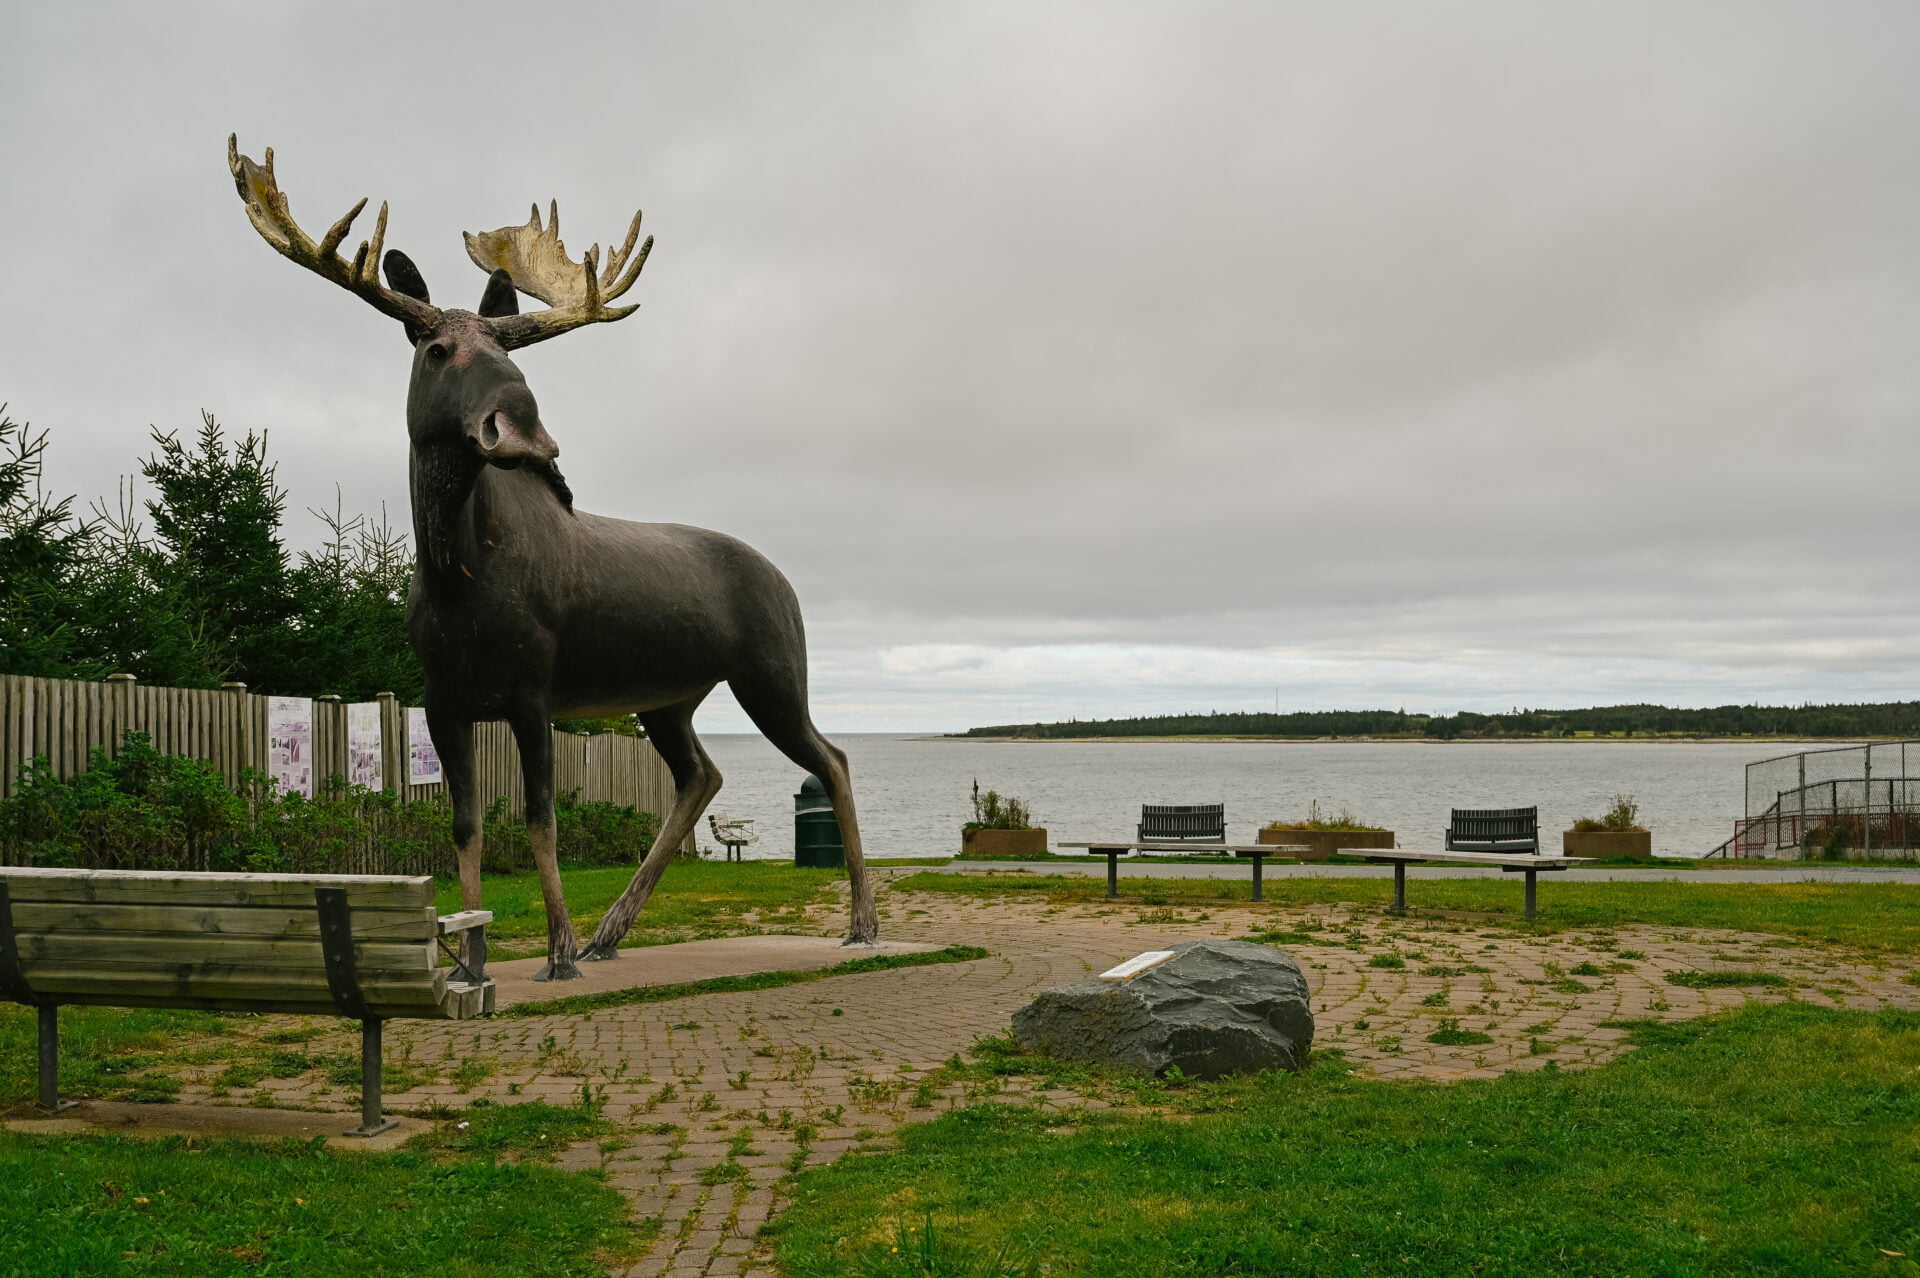 Big Moose statue in Cow Bay, a great photo opportunity on our Halifax road trip 